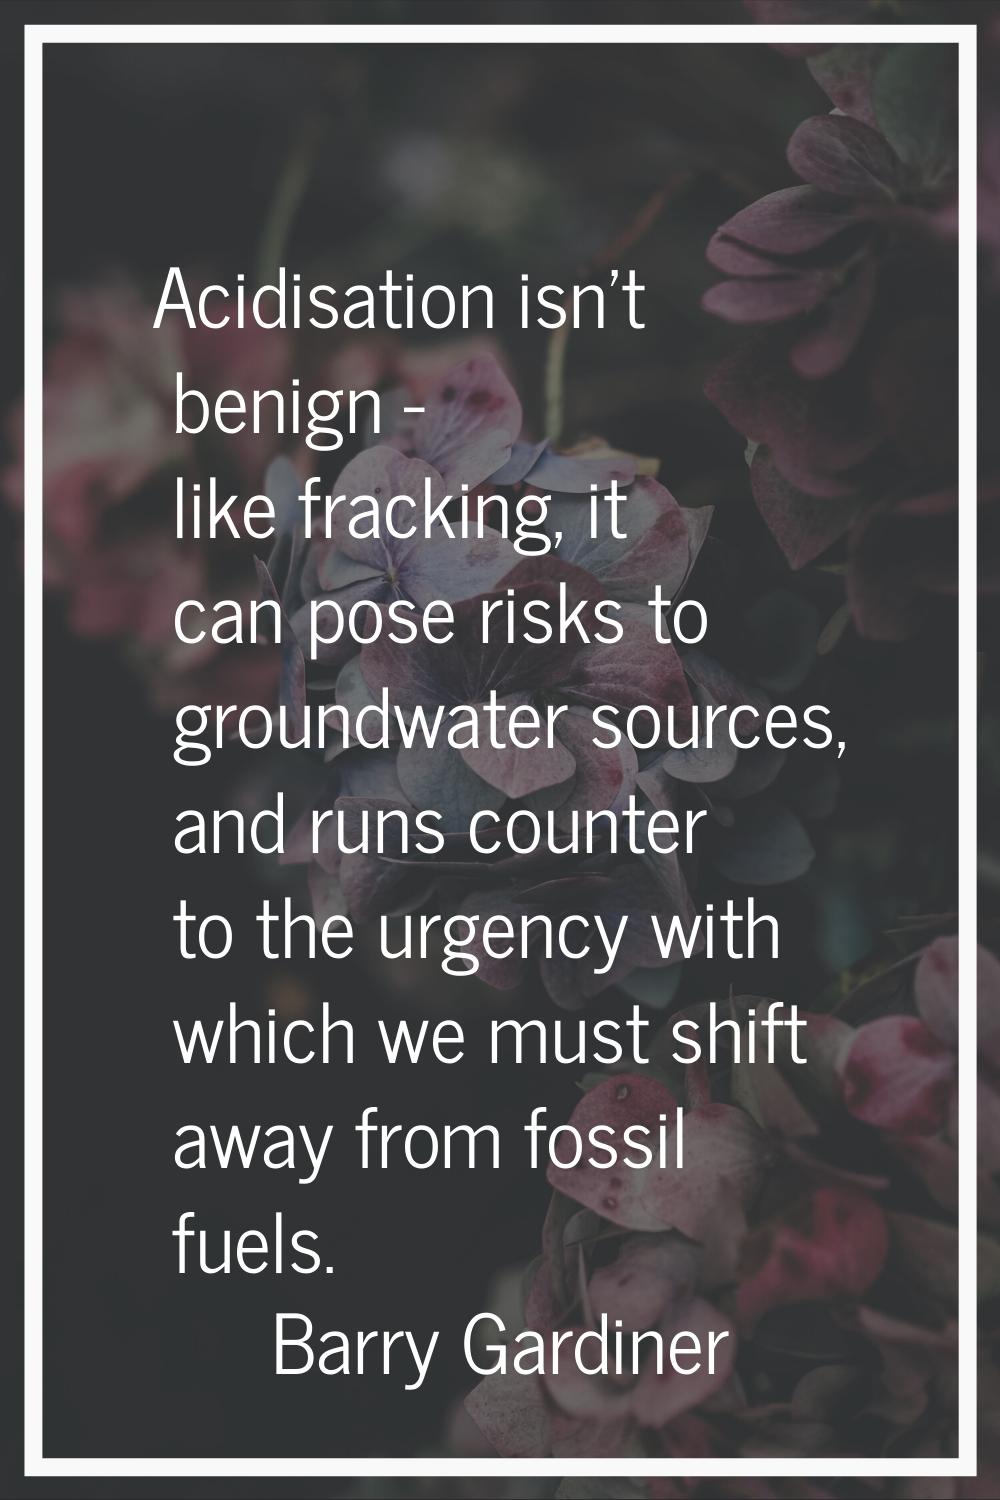 Acidisation isn't benign - like fracking, it can pose risks to groundwater sources, and runs counte